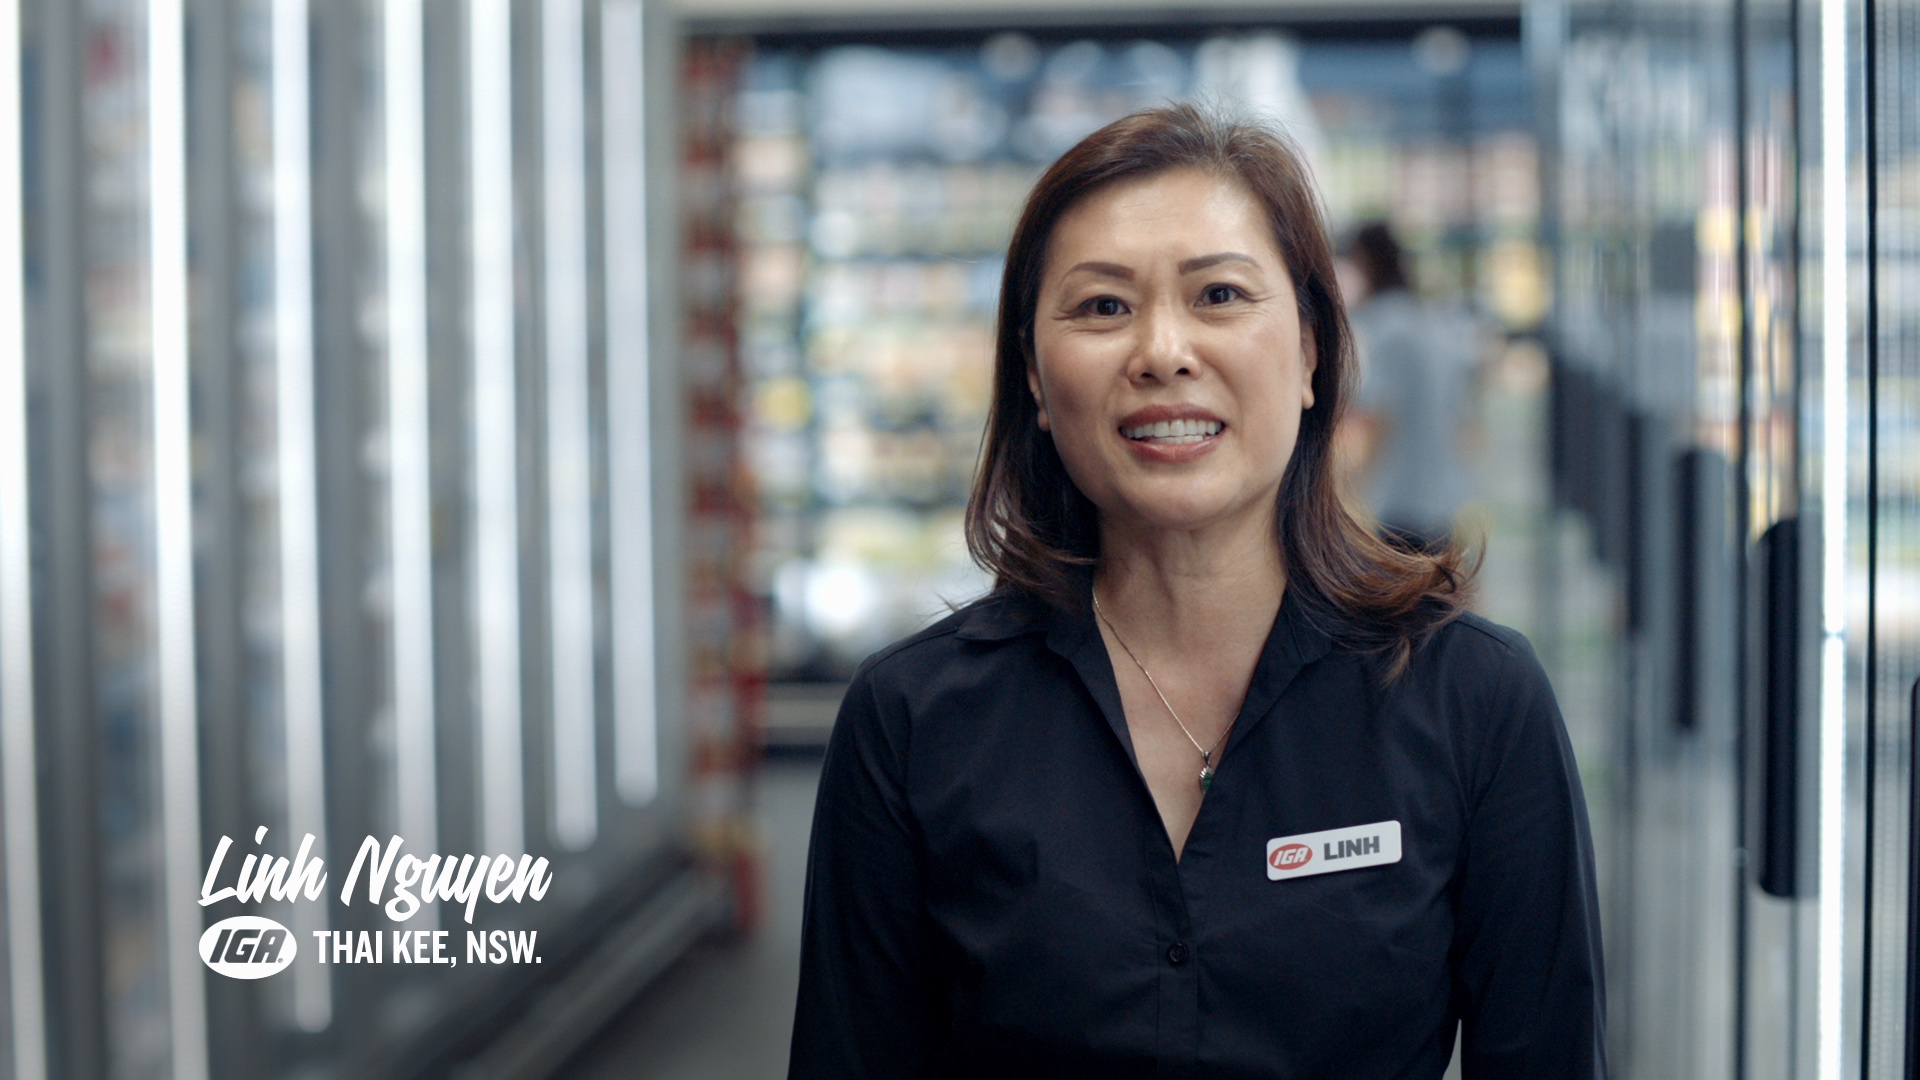 After a Year of Lockdown, IGA Retailers Say 'Thank You' in TVC Campaign